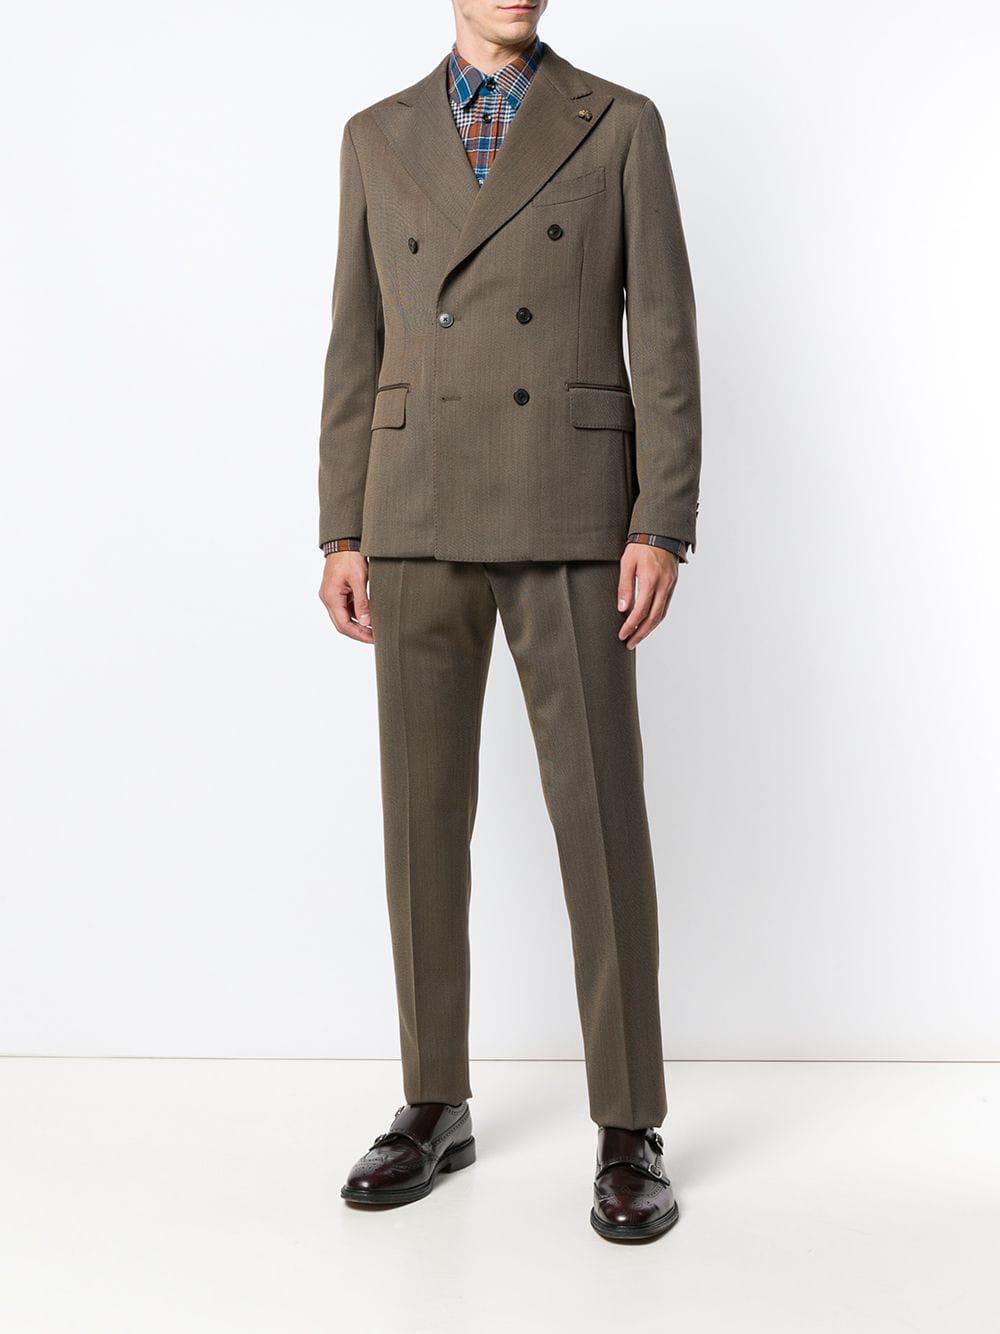 Gabriele Pasini Double Breasted Suit in Brown for Men - Lyst